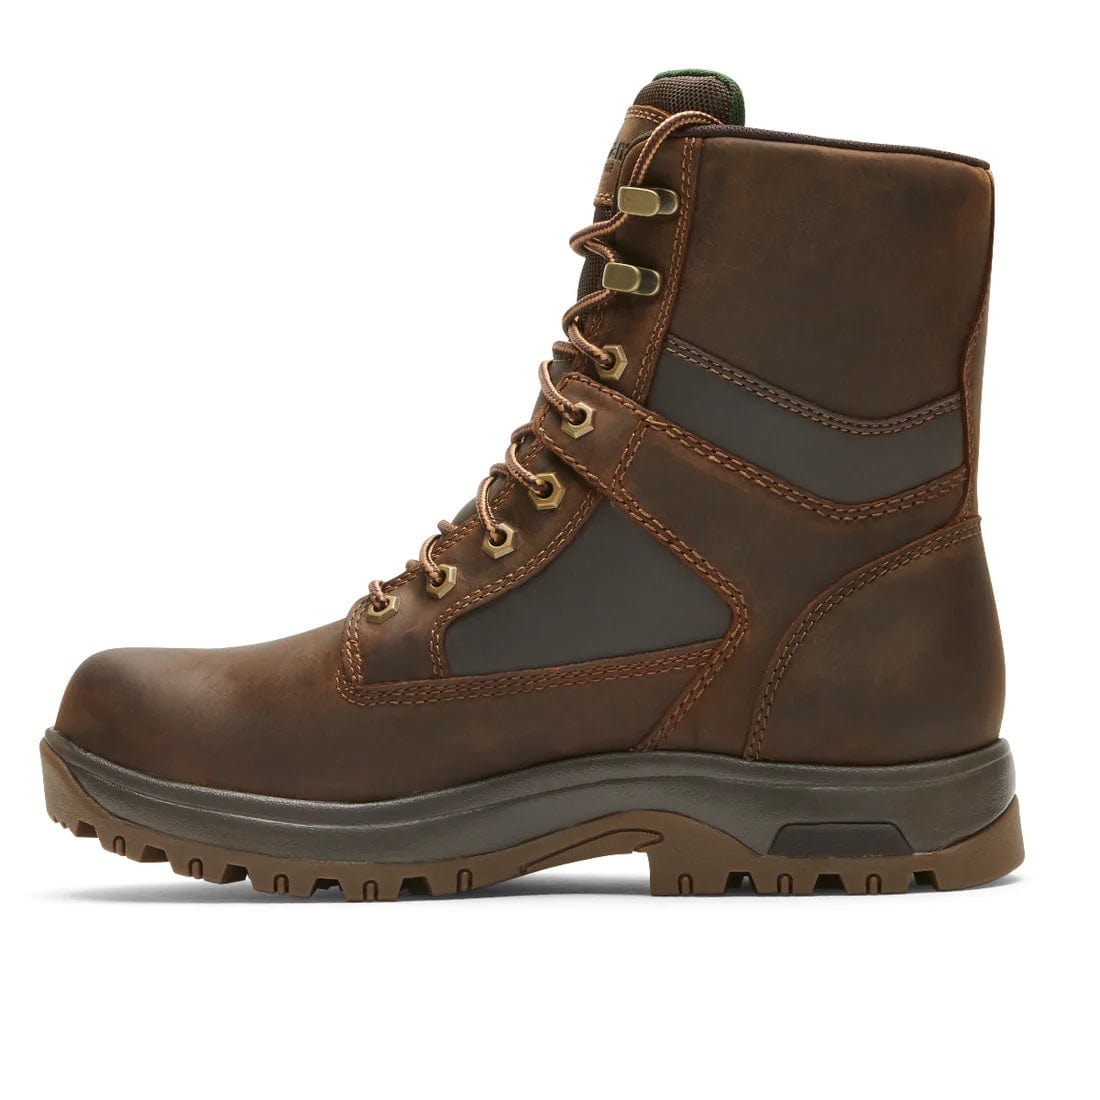 8000Works Waterproof 8-Inch Plain Toe Boot product image